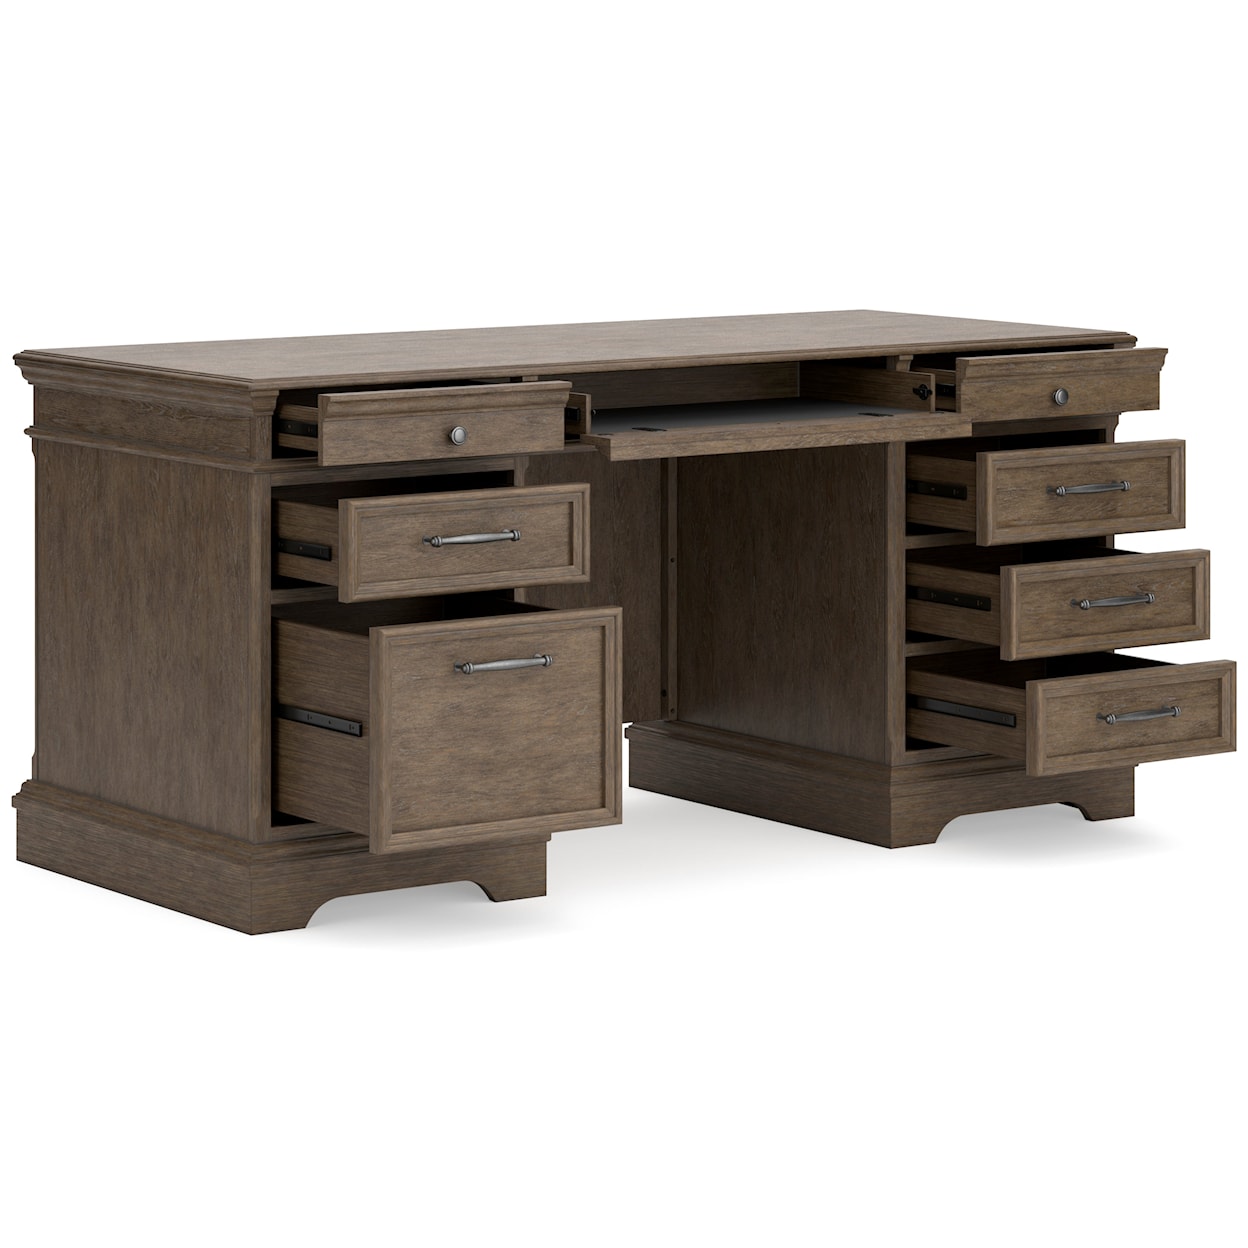 Signature Design by Ashley Janismore Home Office Desk